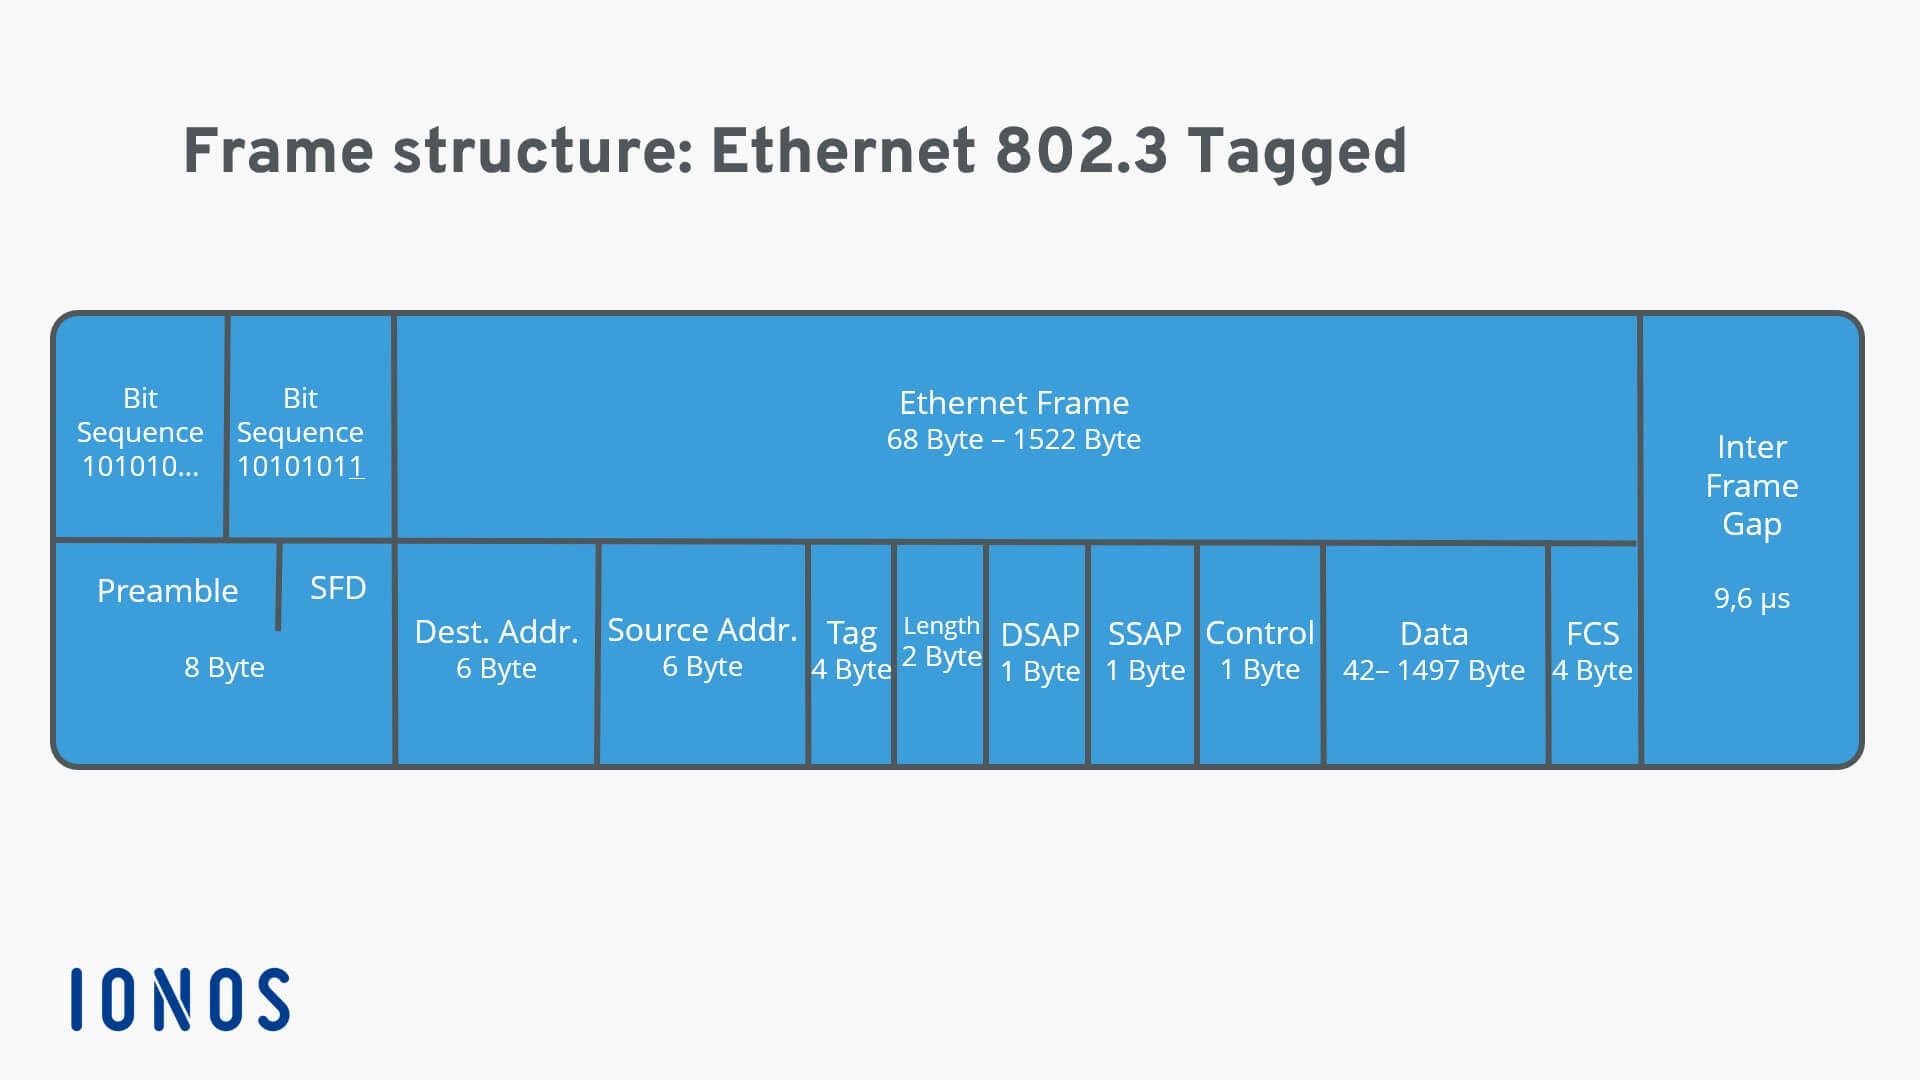 representation of an Ethernet 802.3 tagged frame structure